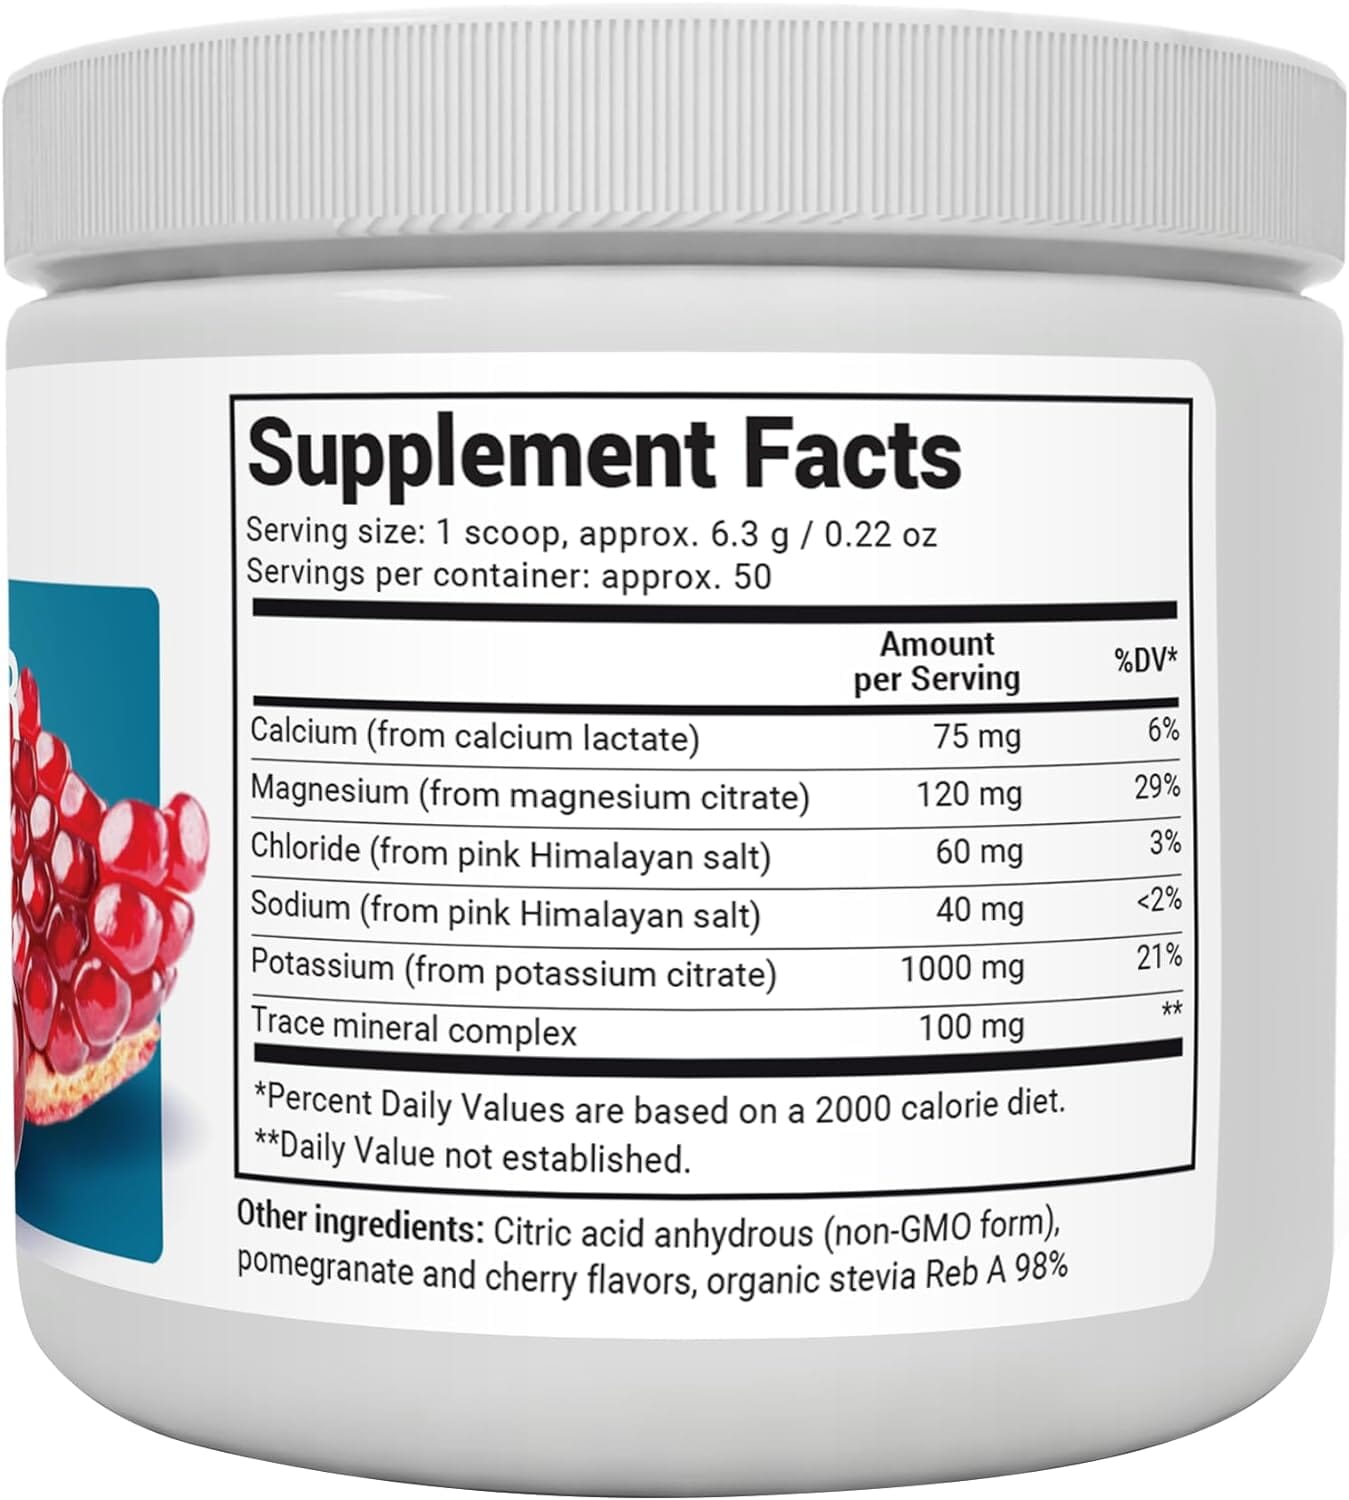 Dr. Berg Zero Sugar Hydration Keto Electrolyte Powder - Enhanced w/ 1,000mg of Potassium & Real Pink Himalayan Salt (NOT Table Salt) - Pomegranate and Cherry Hydration Drink Supplement - 50 Servings